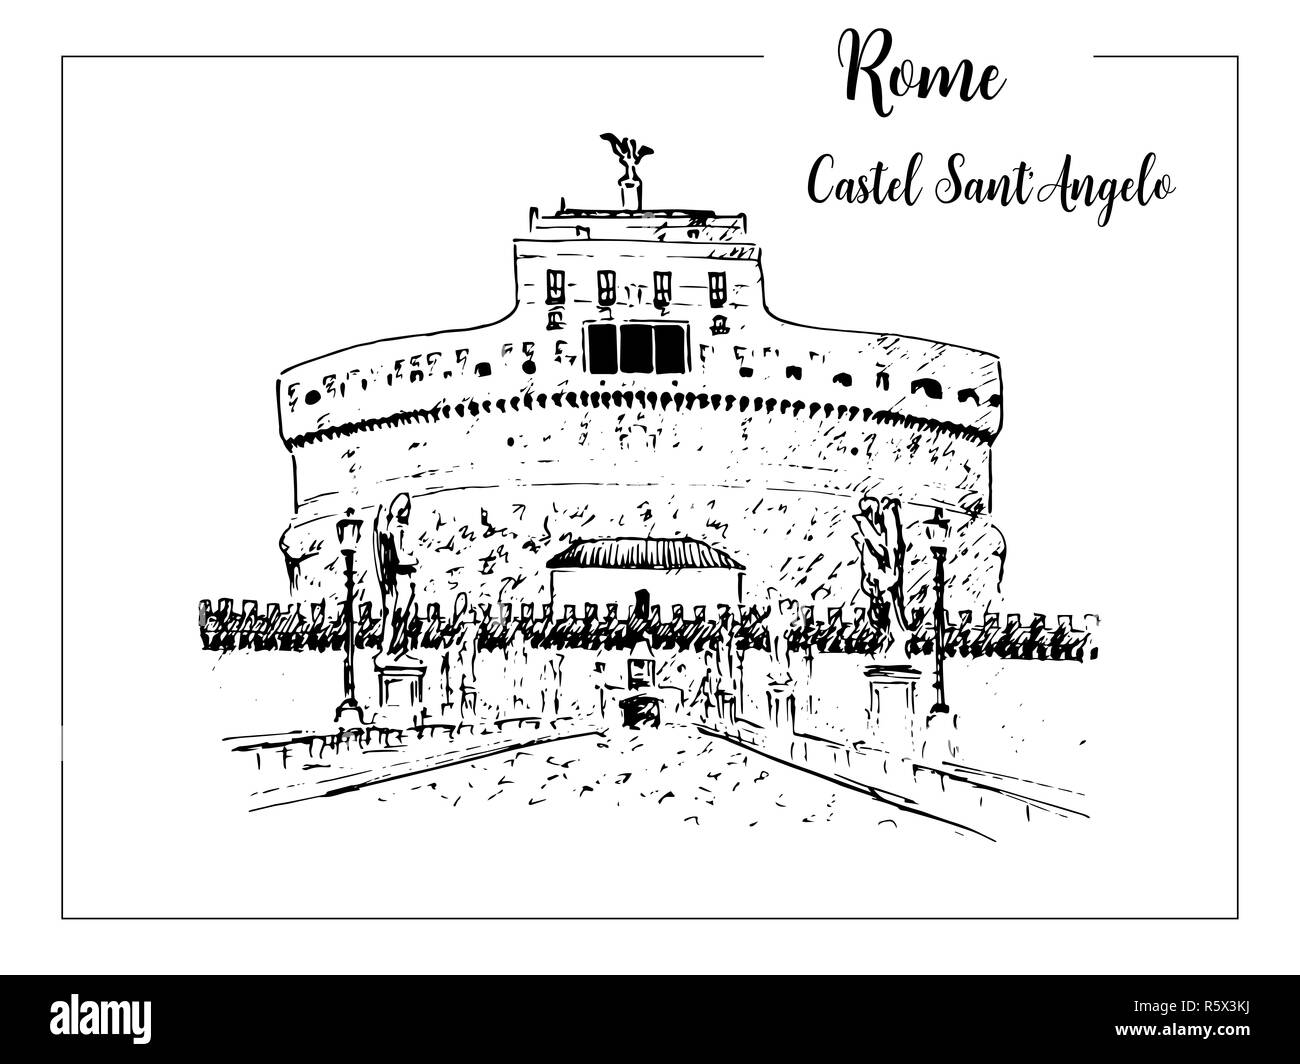 Rome cityscape. Castel Sant'Angelo skyline. architectural symbol. Beautiful hand drawn vector sketch illustration. Italy. Stock Photo